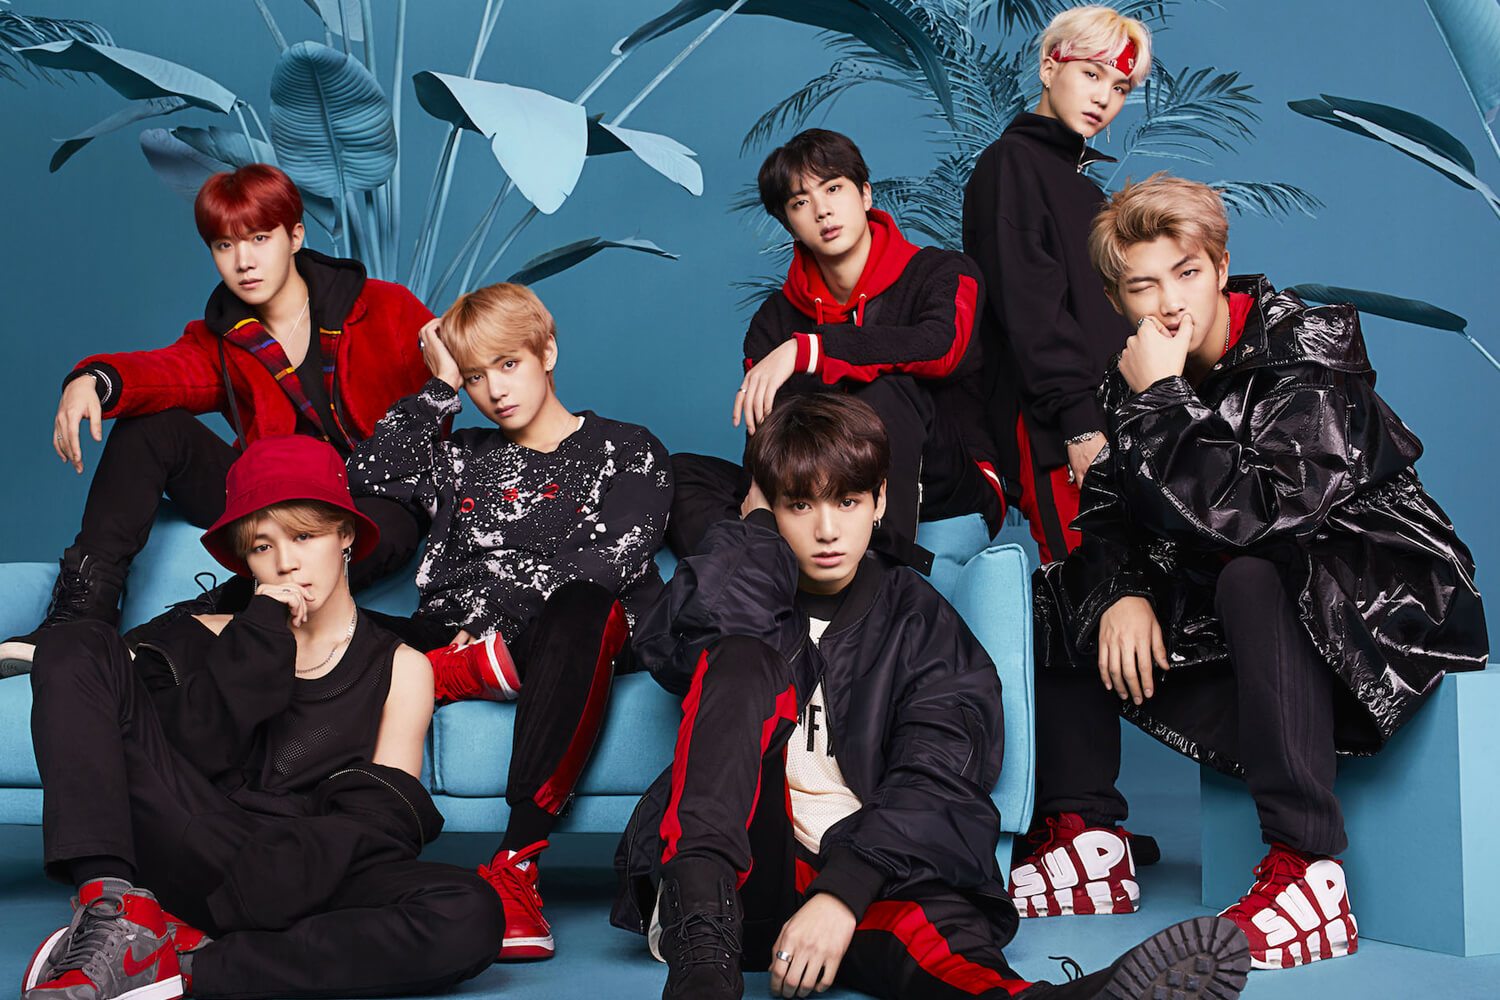 See BTS boys slay fashion and how you can look fly like them Men's